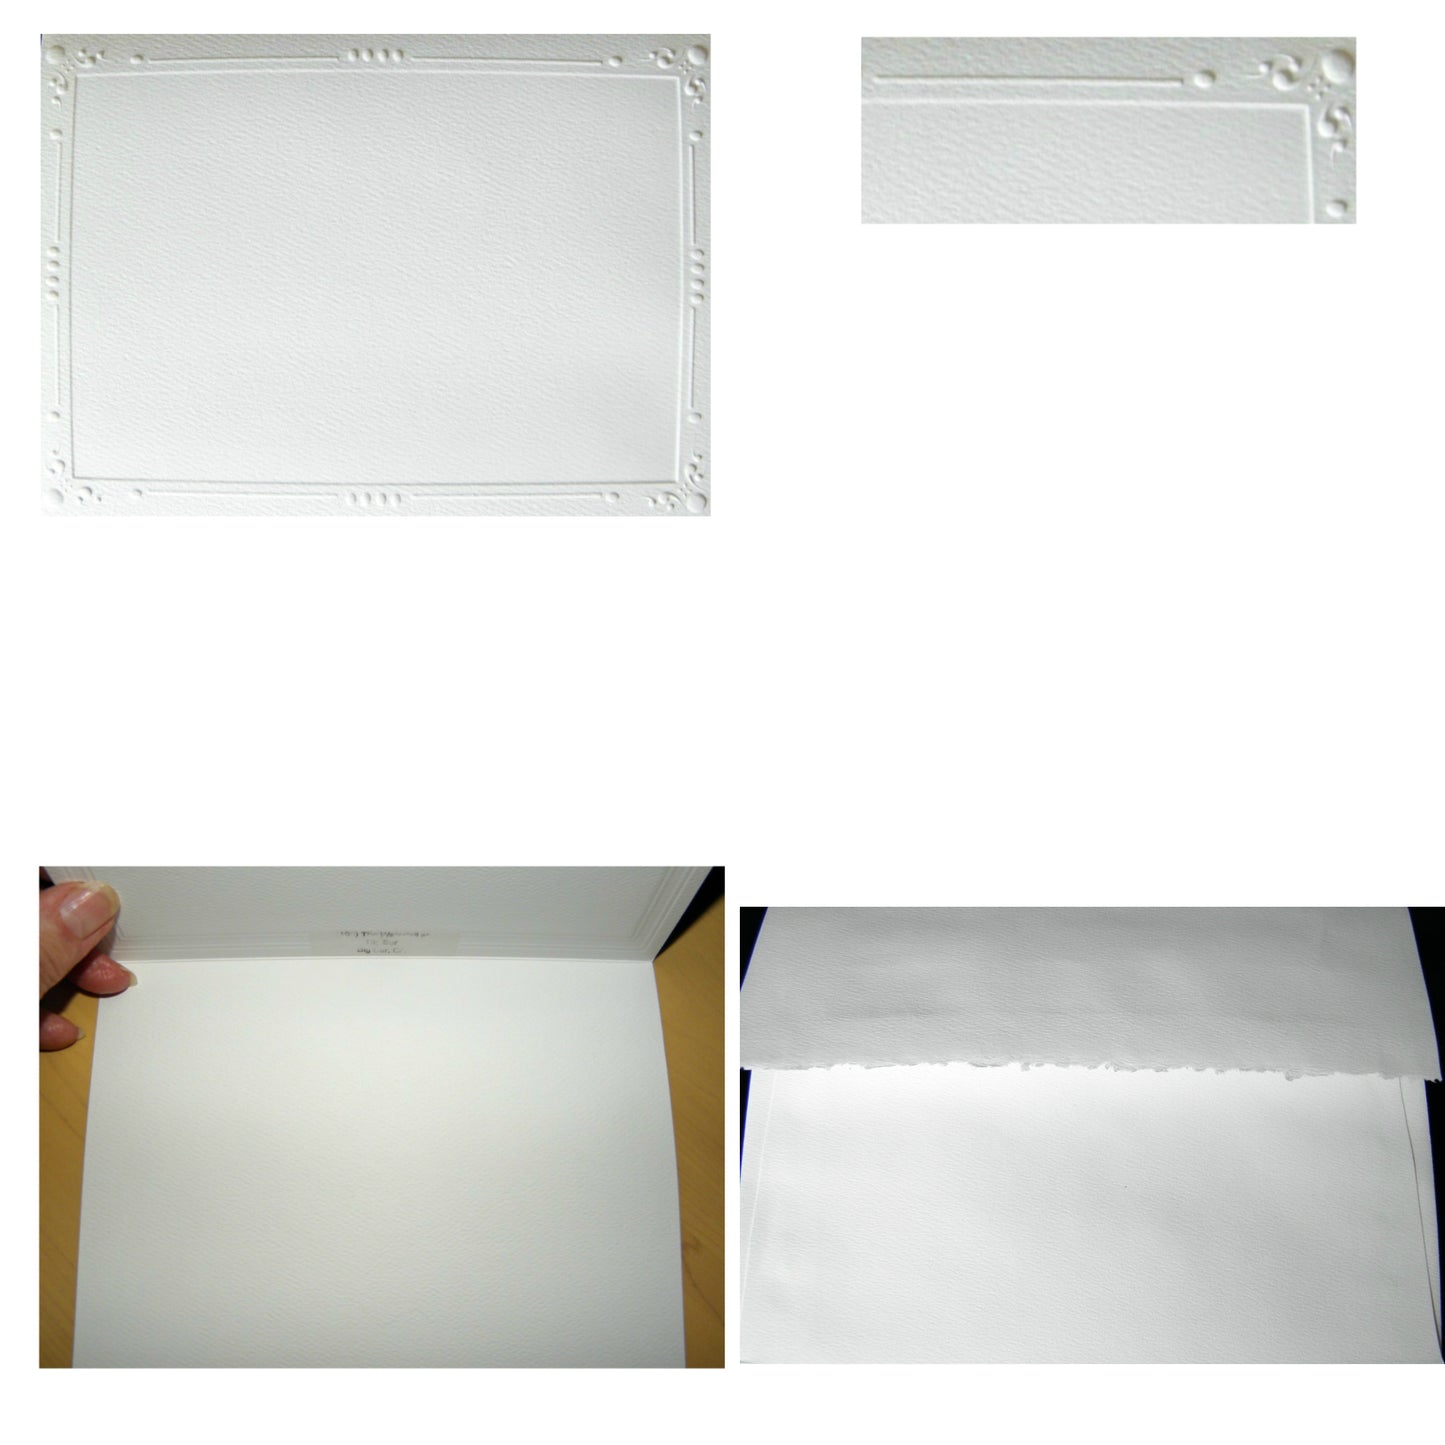 Photo of the deluxe Decorative card stock and coordinating Decorative envelope